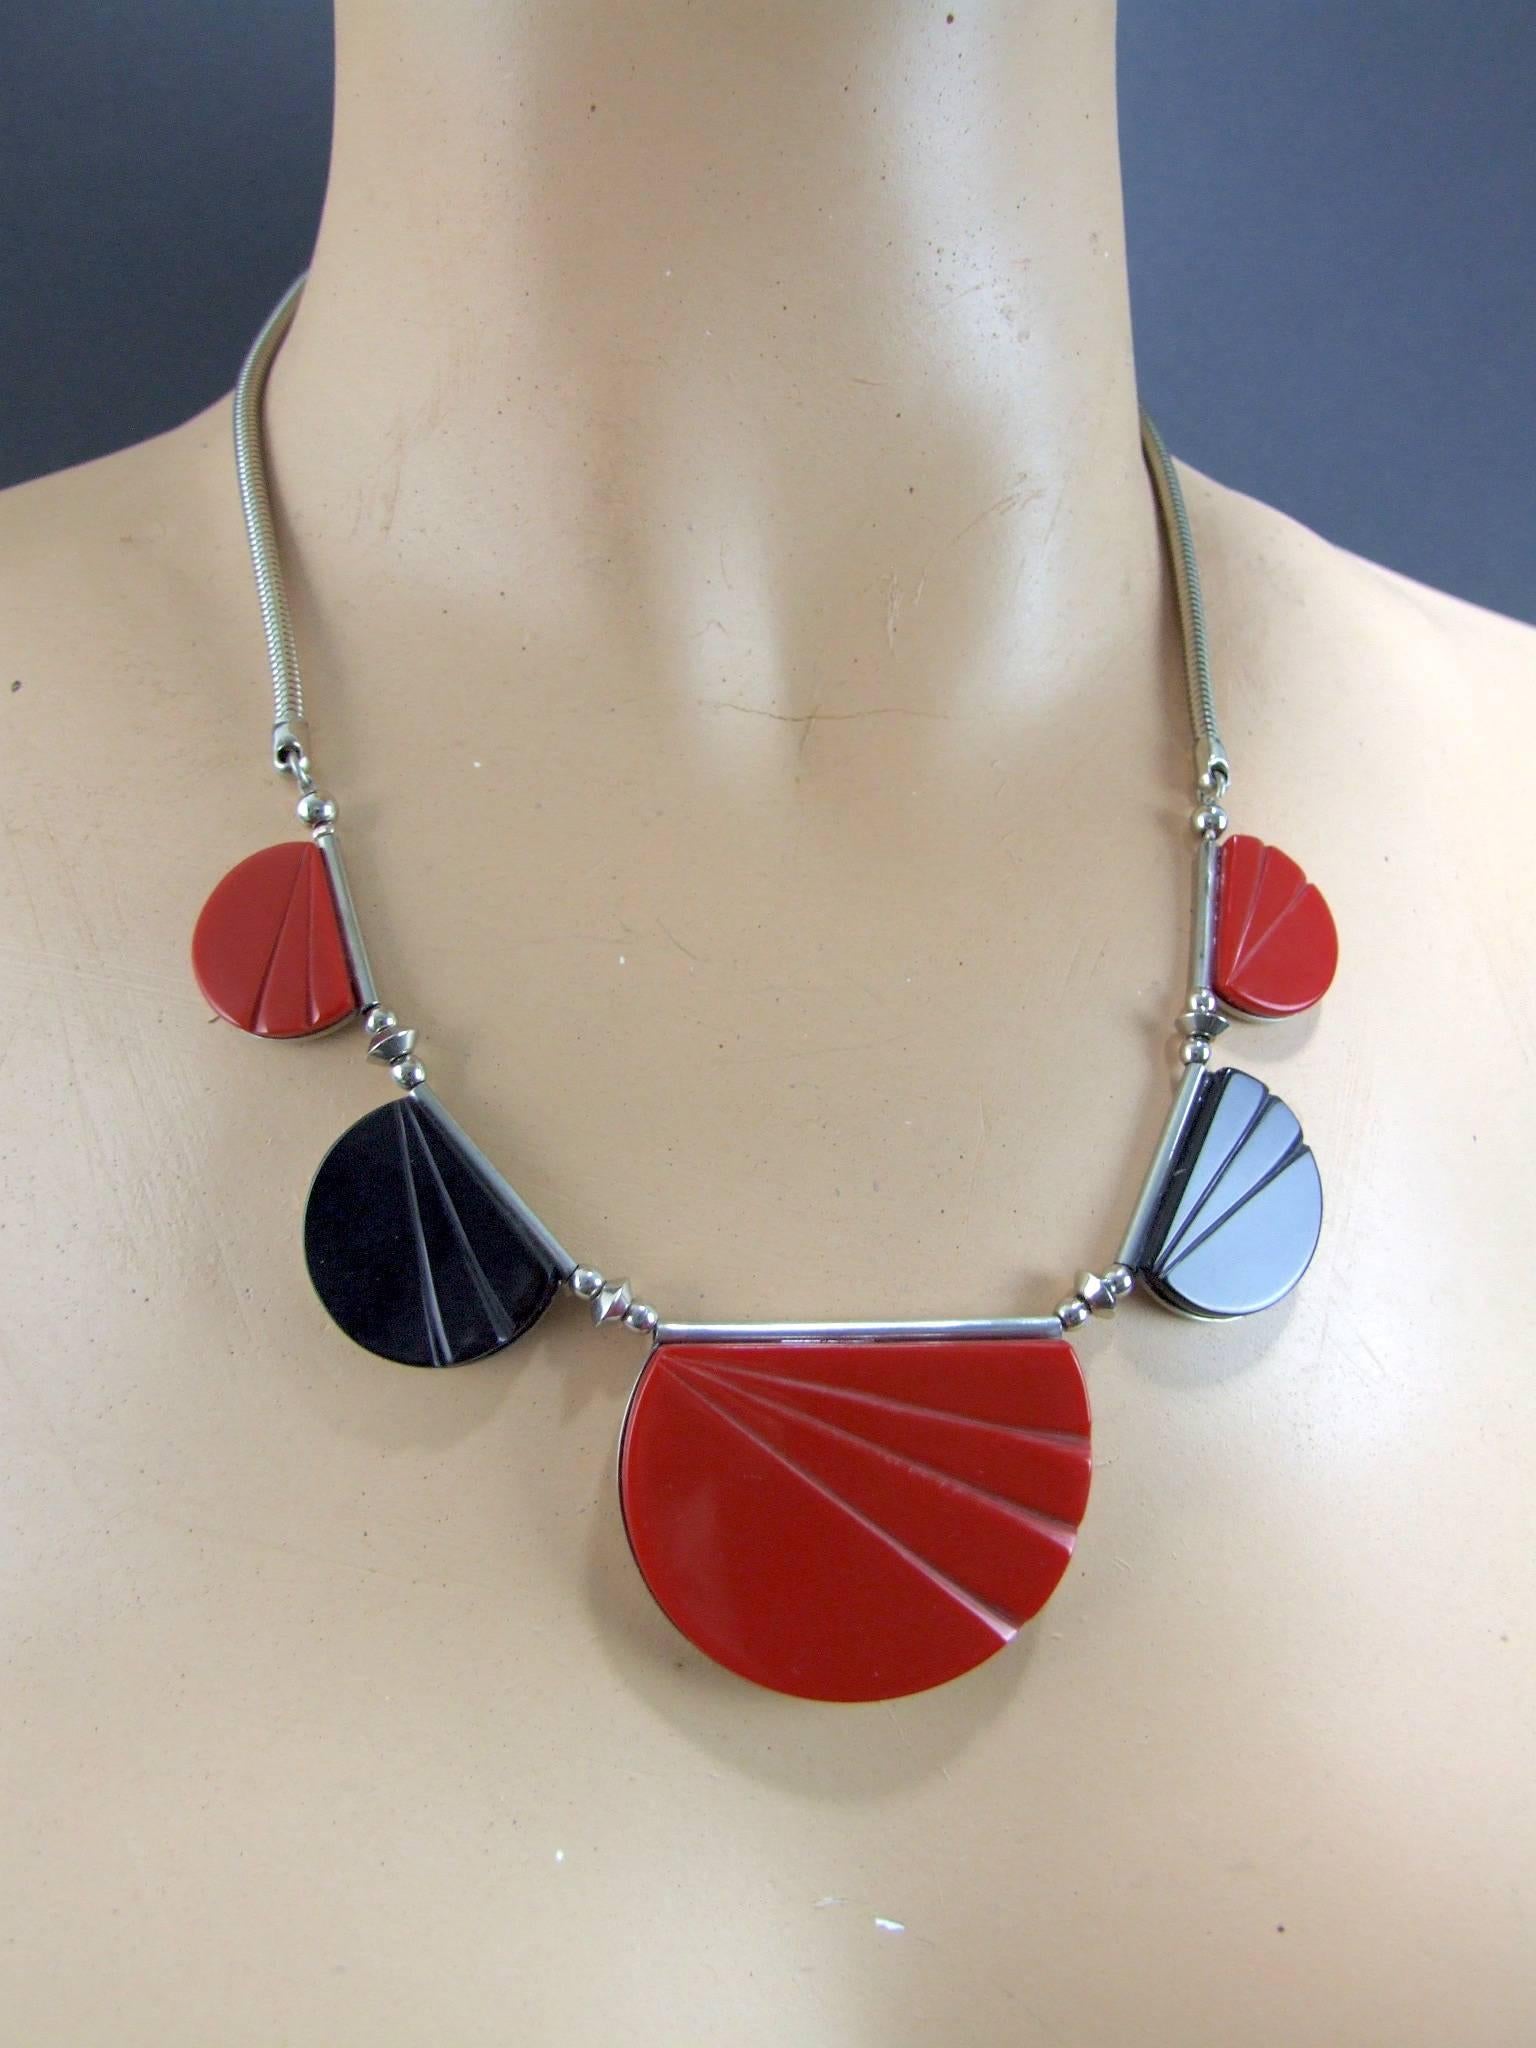 A German galalith and polished metal necklace in red and black carved galalith panels made in the early 1930s. The centre red galalith section measures 1.5 inches high by 2 inches wide. Total length from clasp to clasp is 19.5 inches (49cm). In